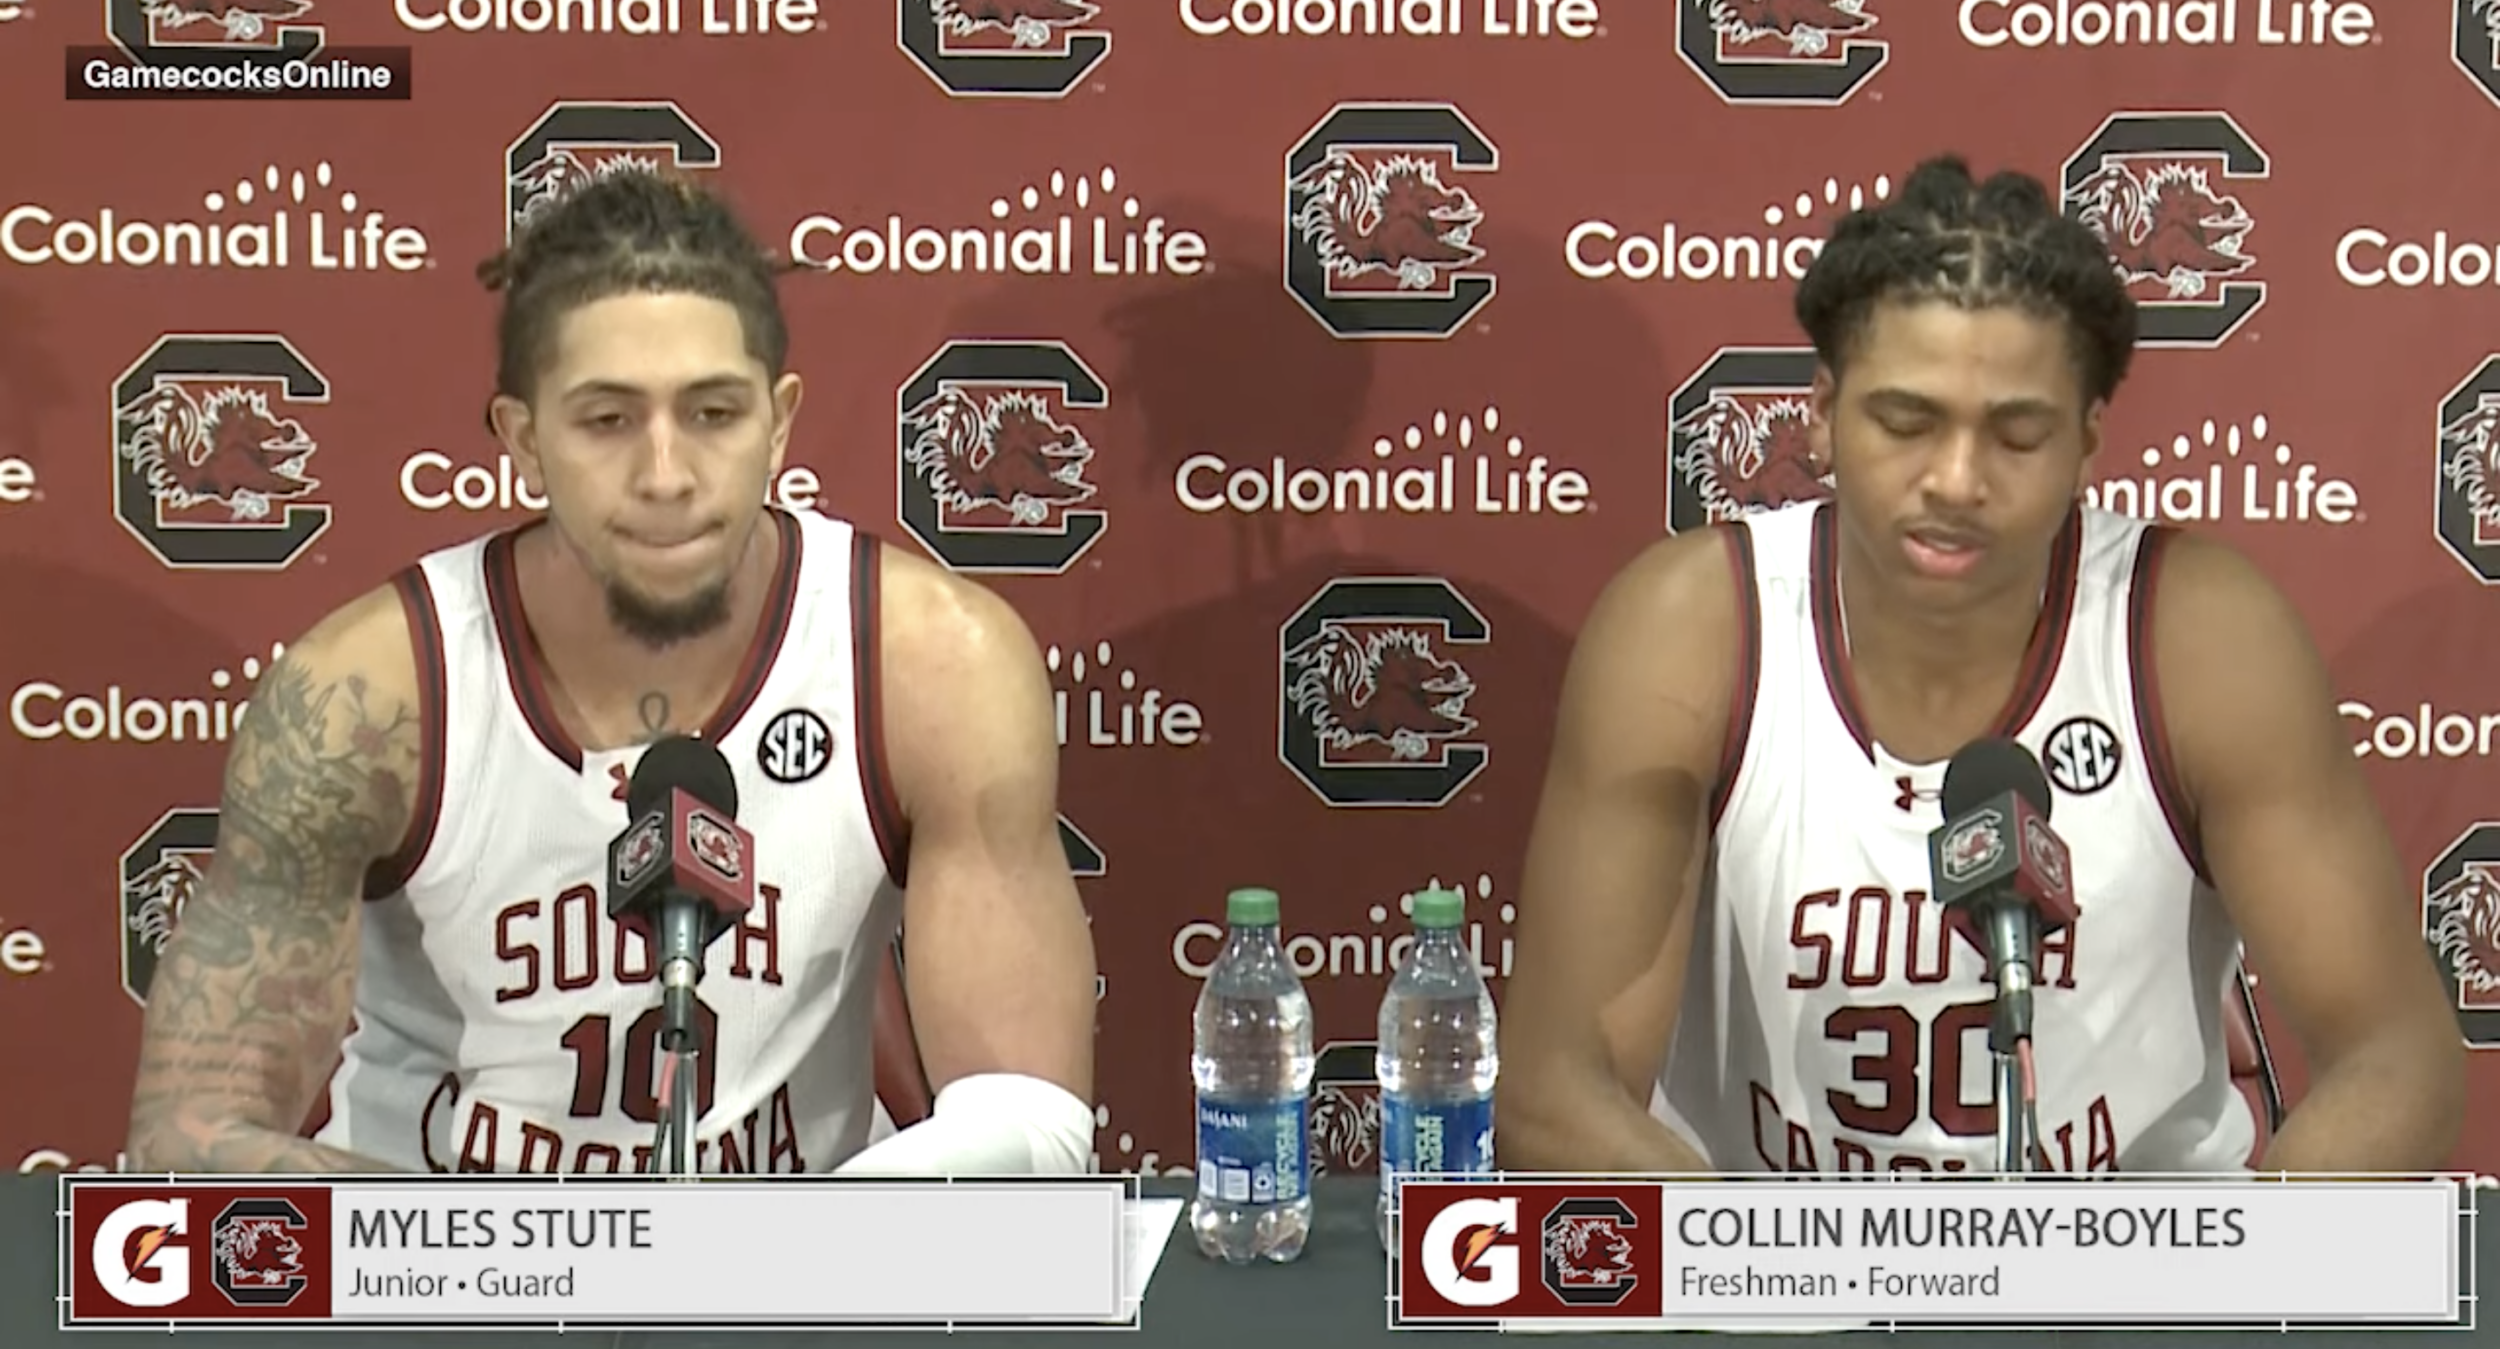 MBB PostGame News Conference: Myles Stute and Collin Murray-Boyles - (FAMU)